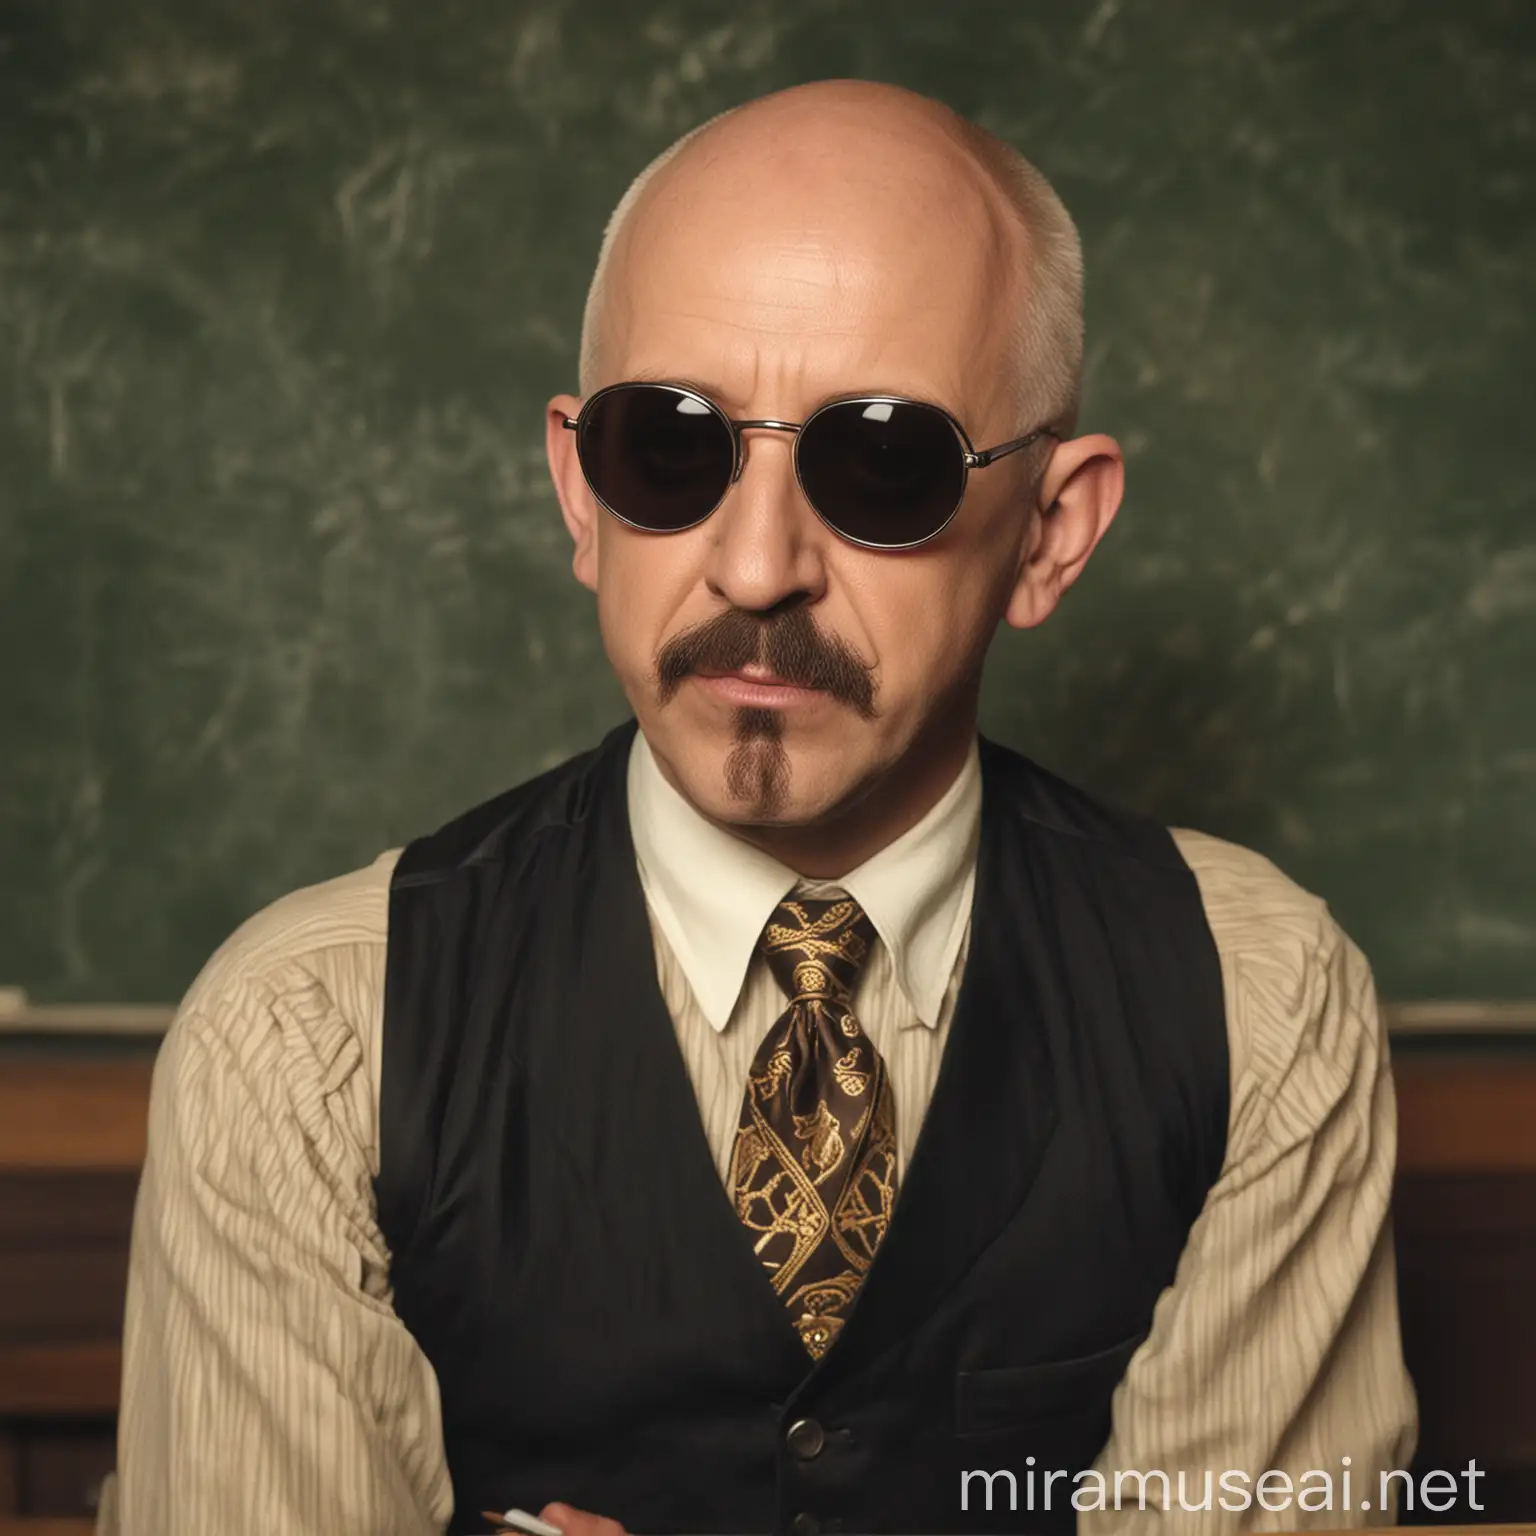 Rob Halford without sunglasses in 1920's clothes in a 1920's classroom in color